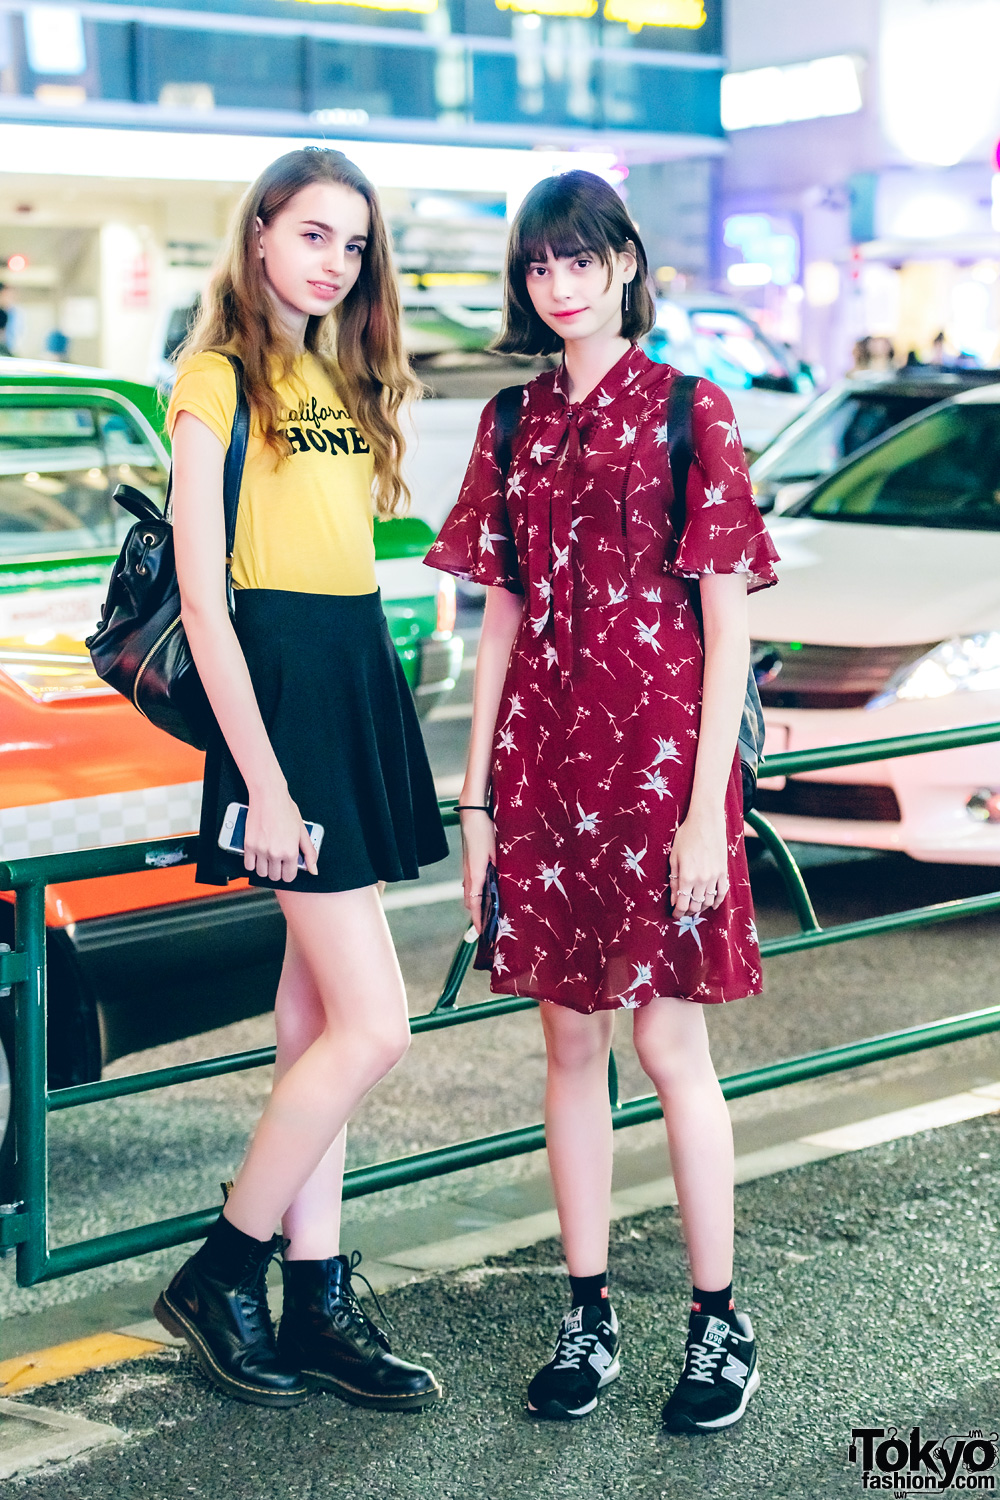 Harajuku Models in Casual Street Styles w/ Dr. Martens Boots, New Balance Sneakers & Louis Vuitton Backpack